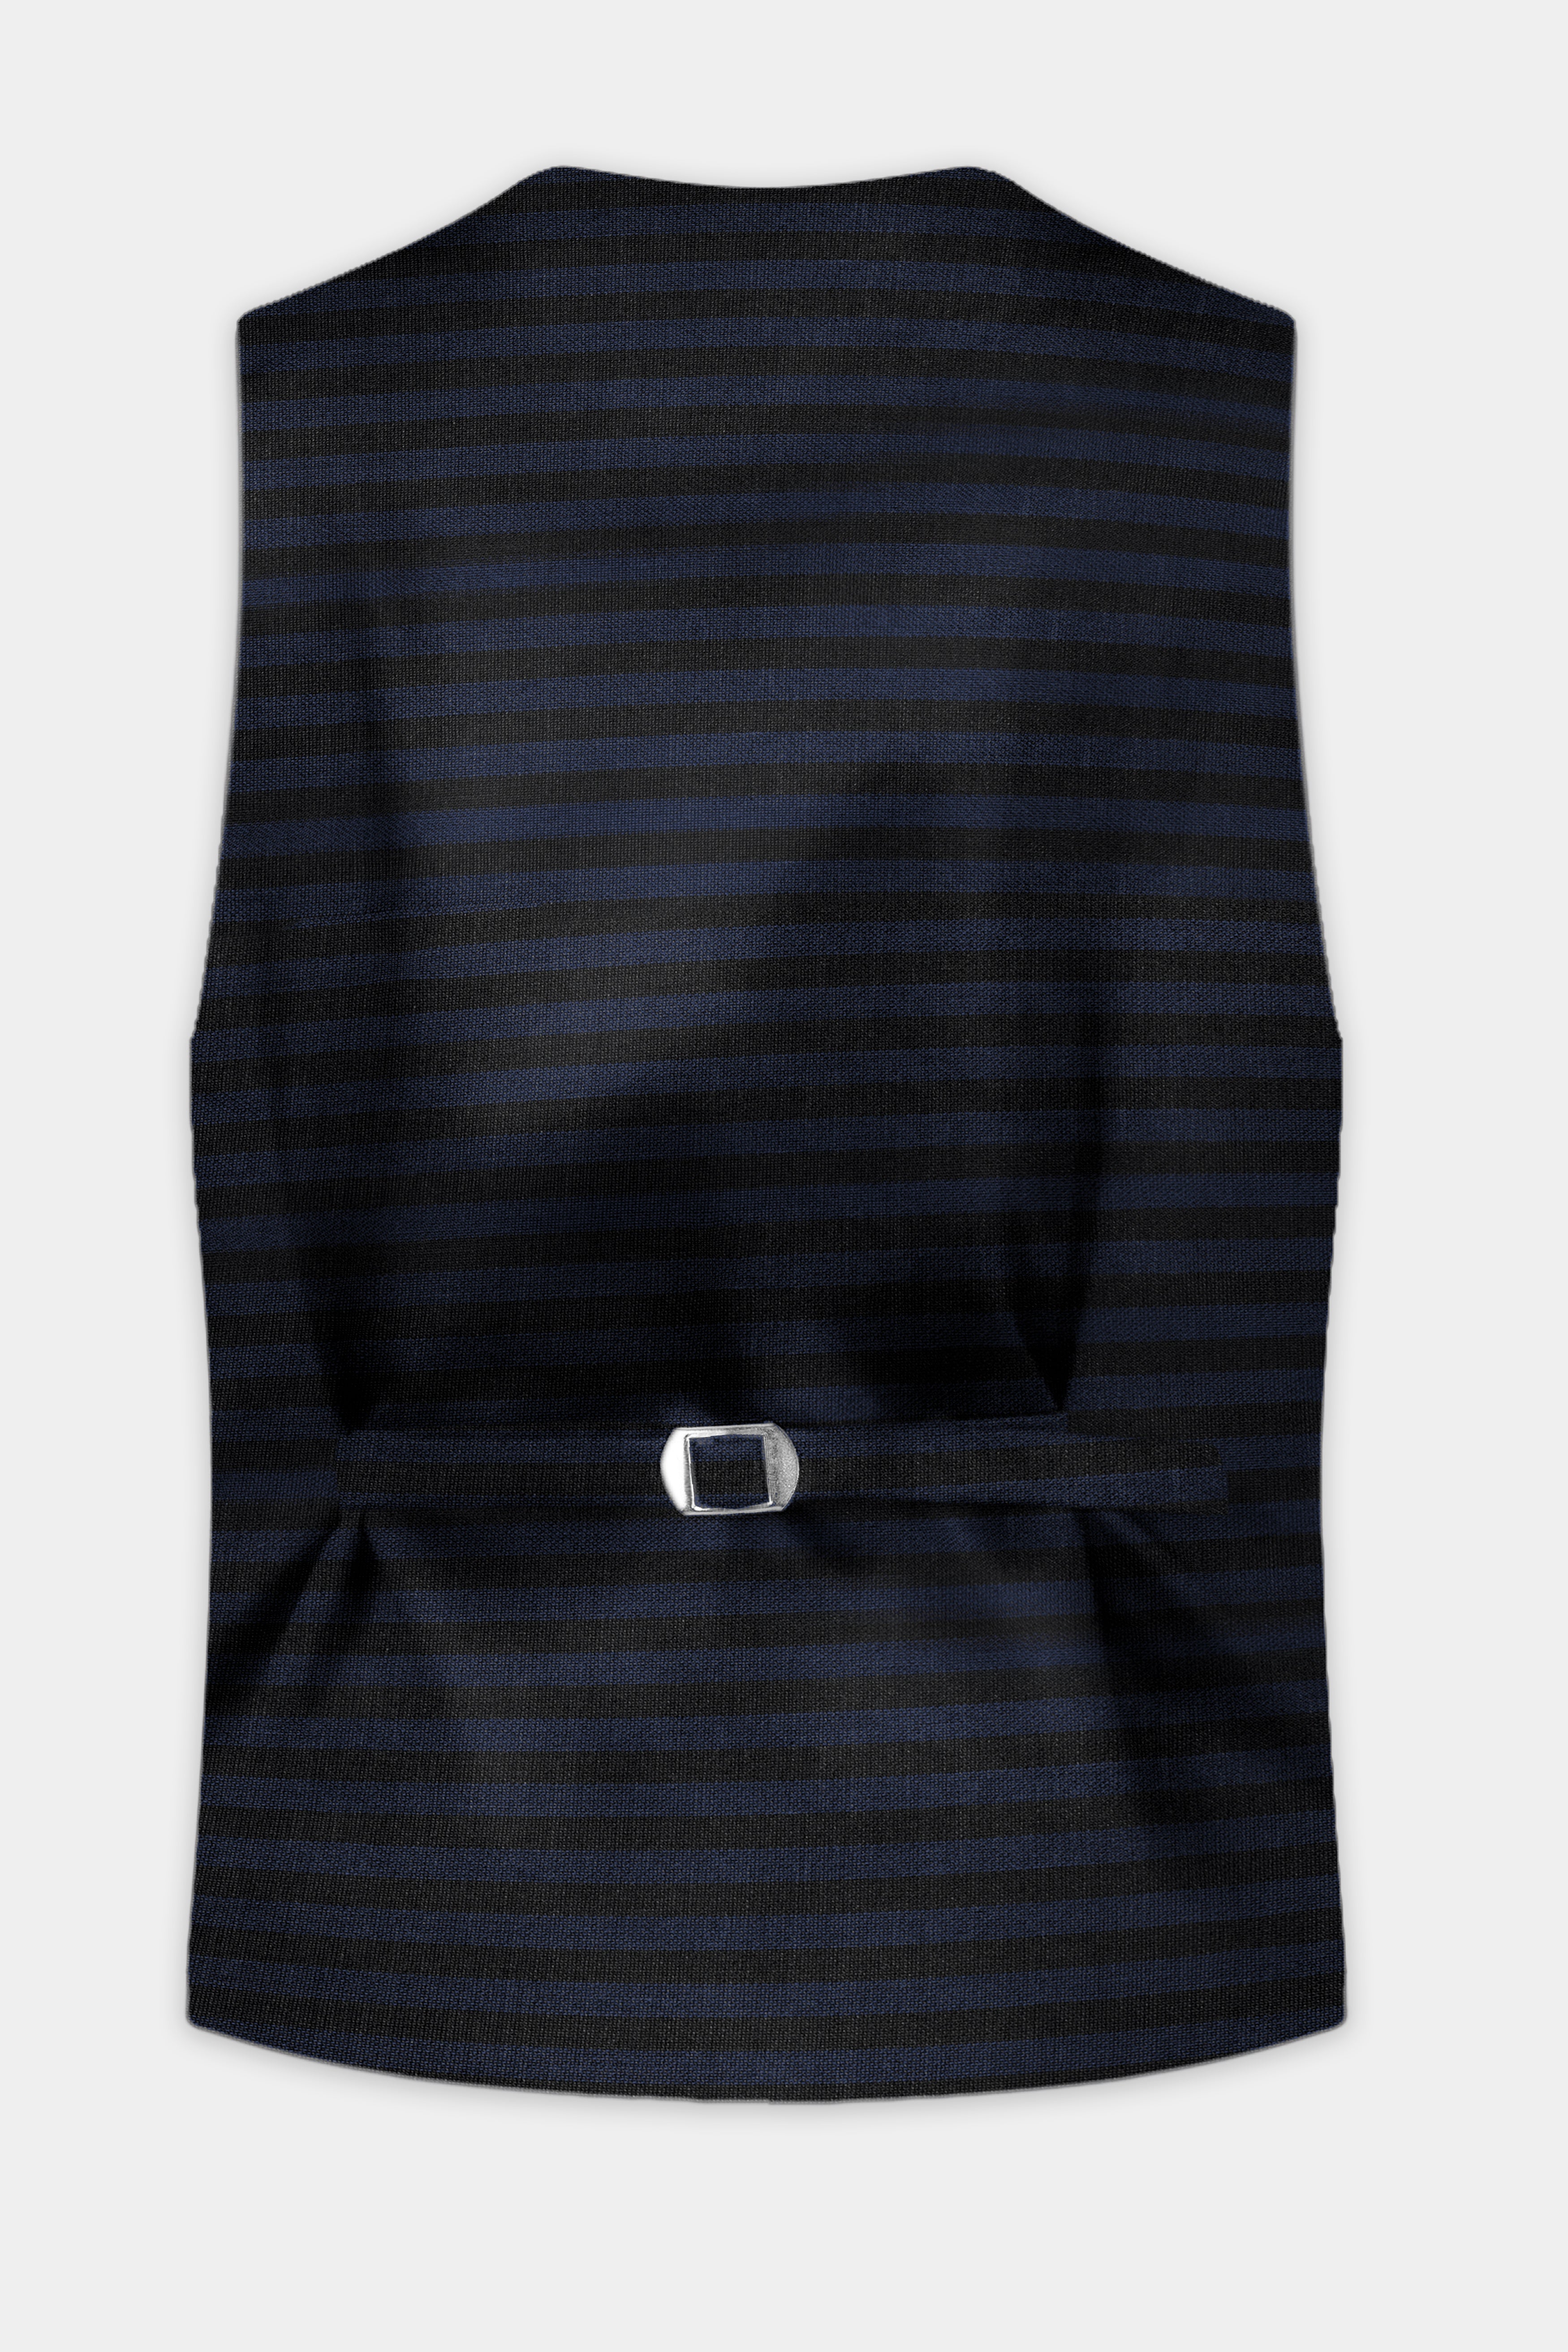 Mirage Blue and Black Striped Wool Blend Waistcoat